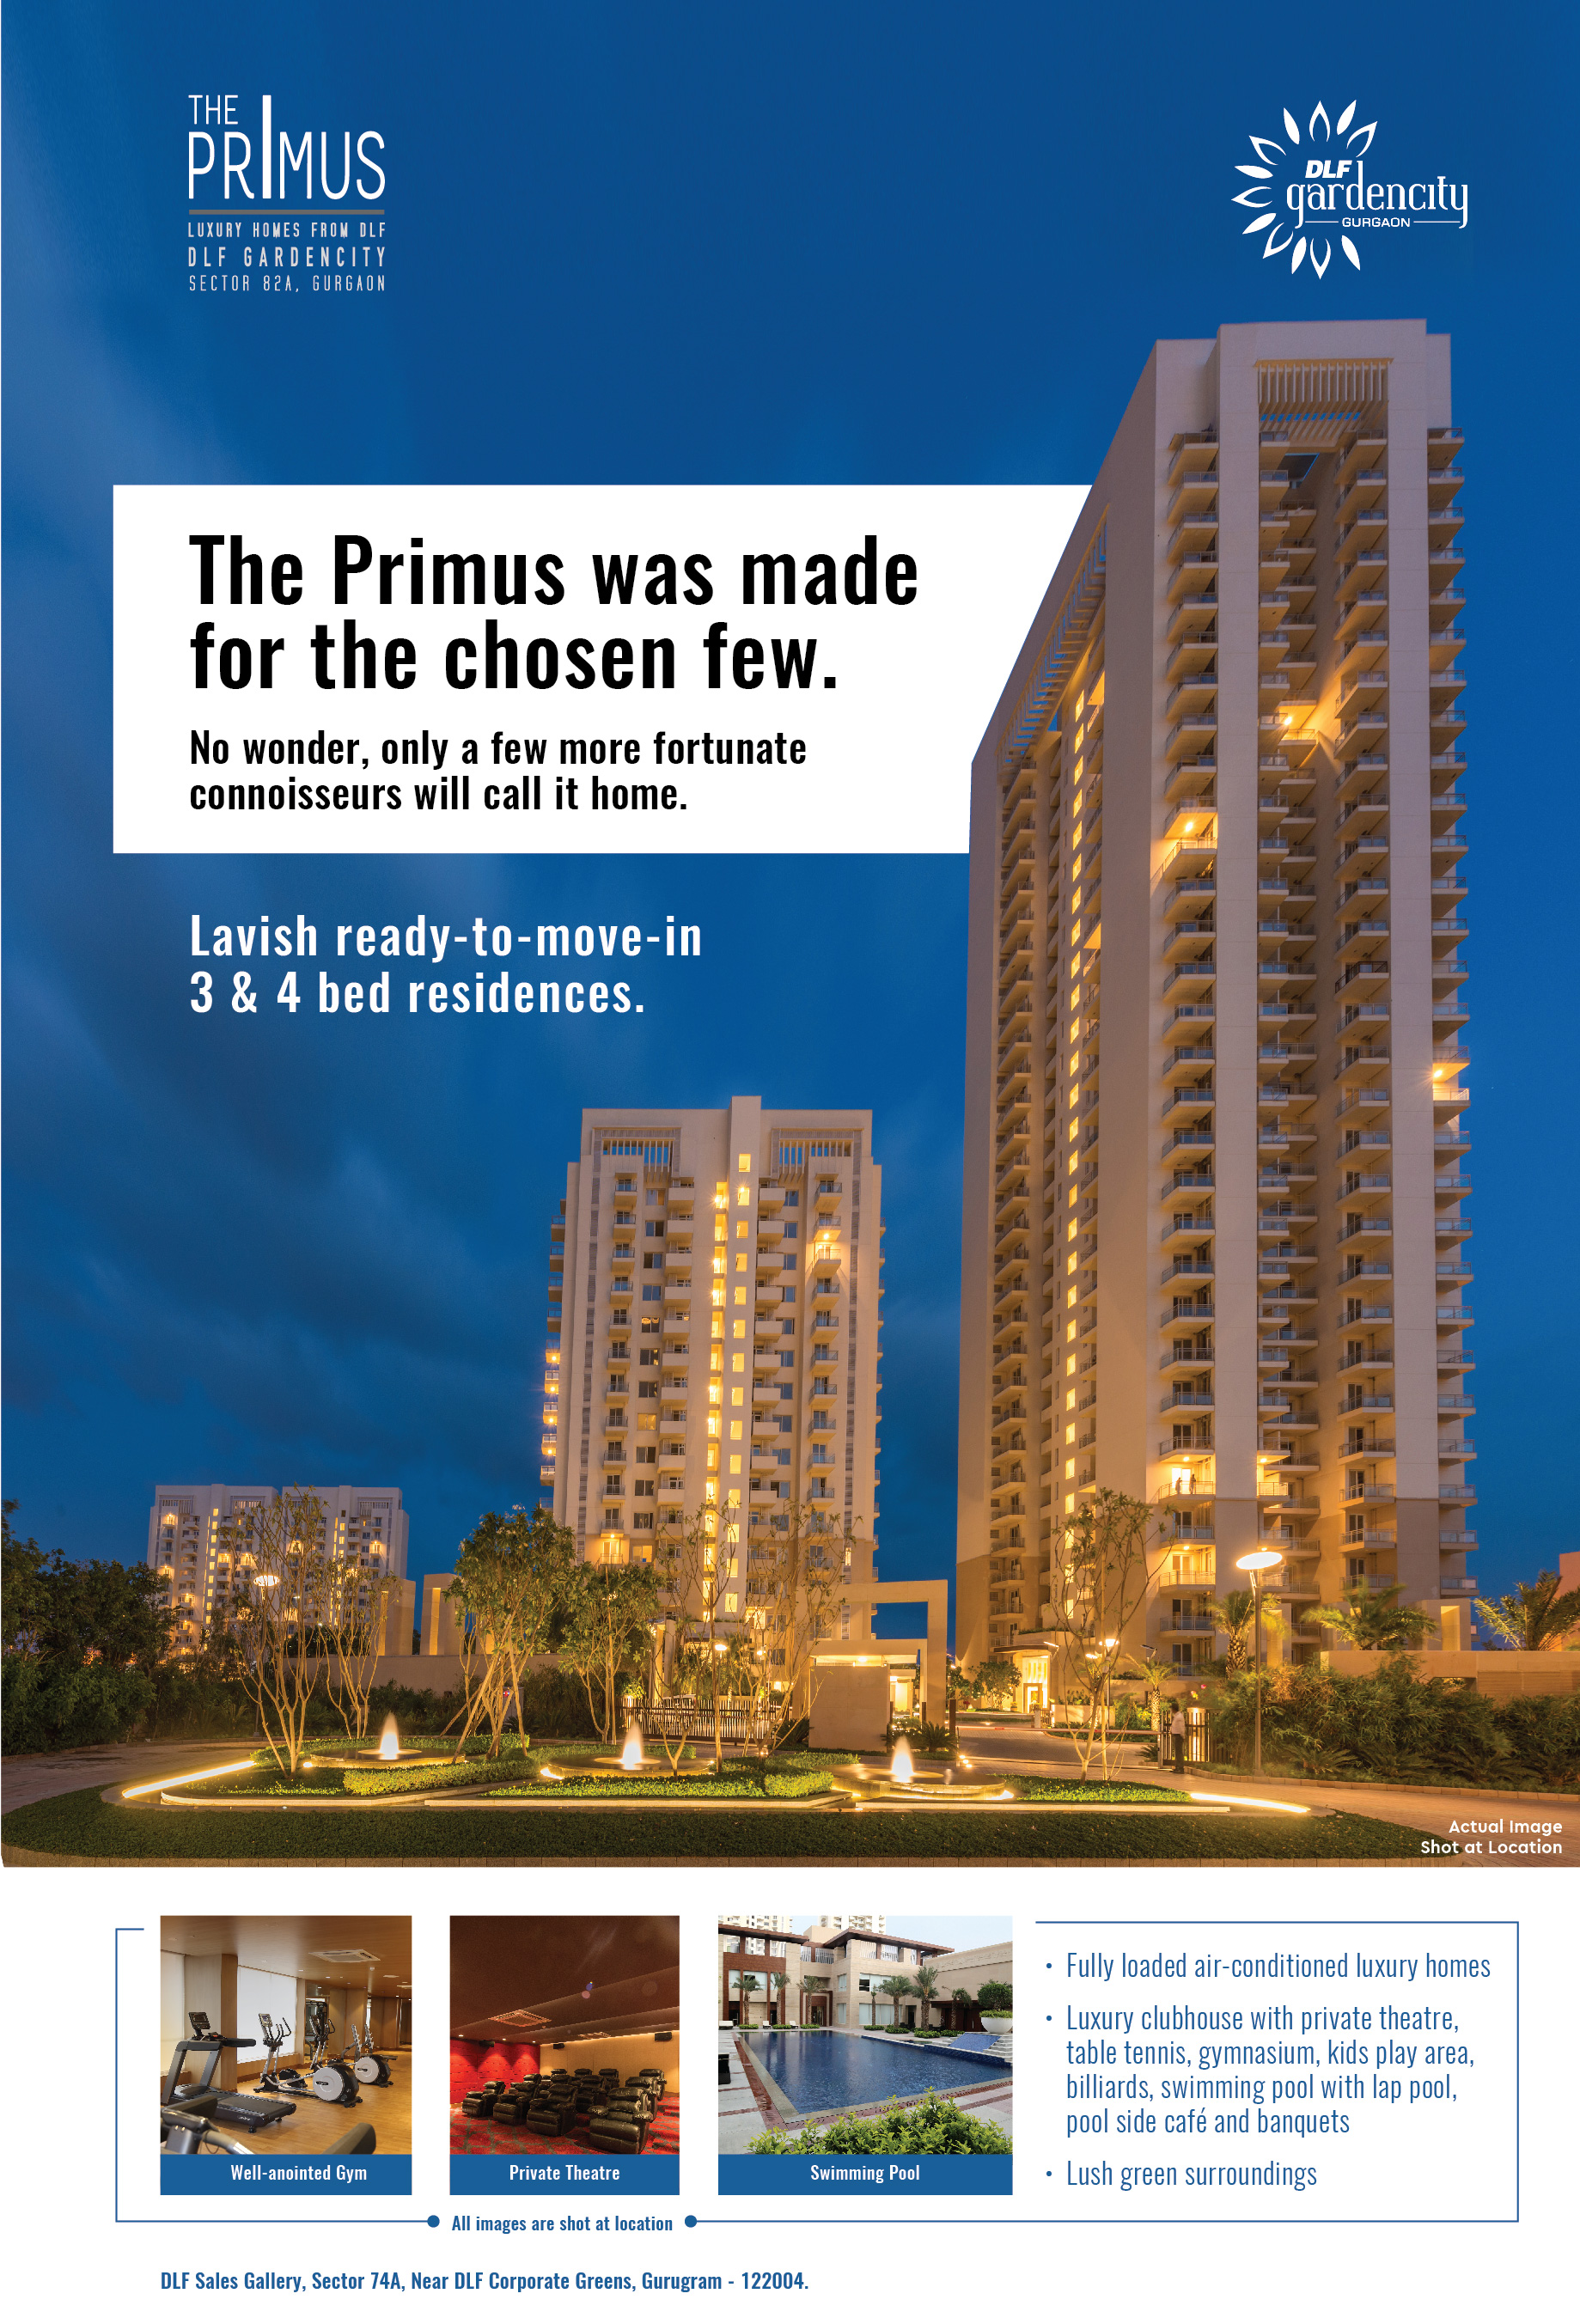 Live in Fully Loaded Ready To Move In Apartments at DLF Primus